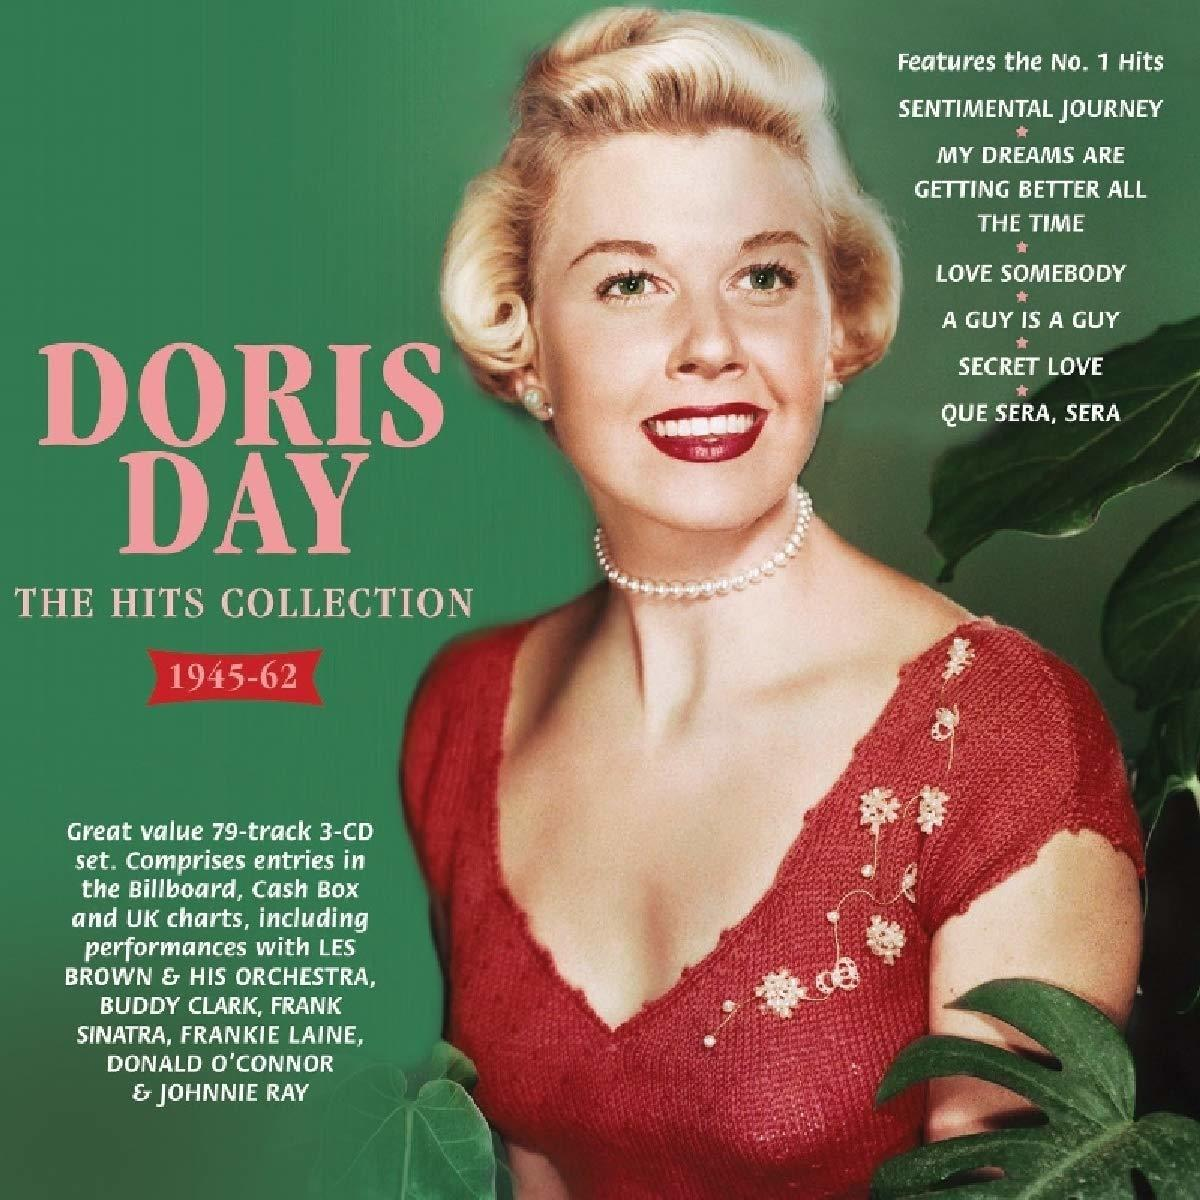 Doris Day COLLECTION - THE 1945-1962 (CD) - HITS